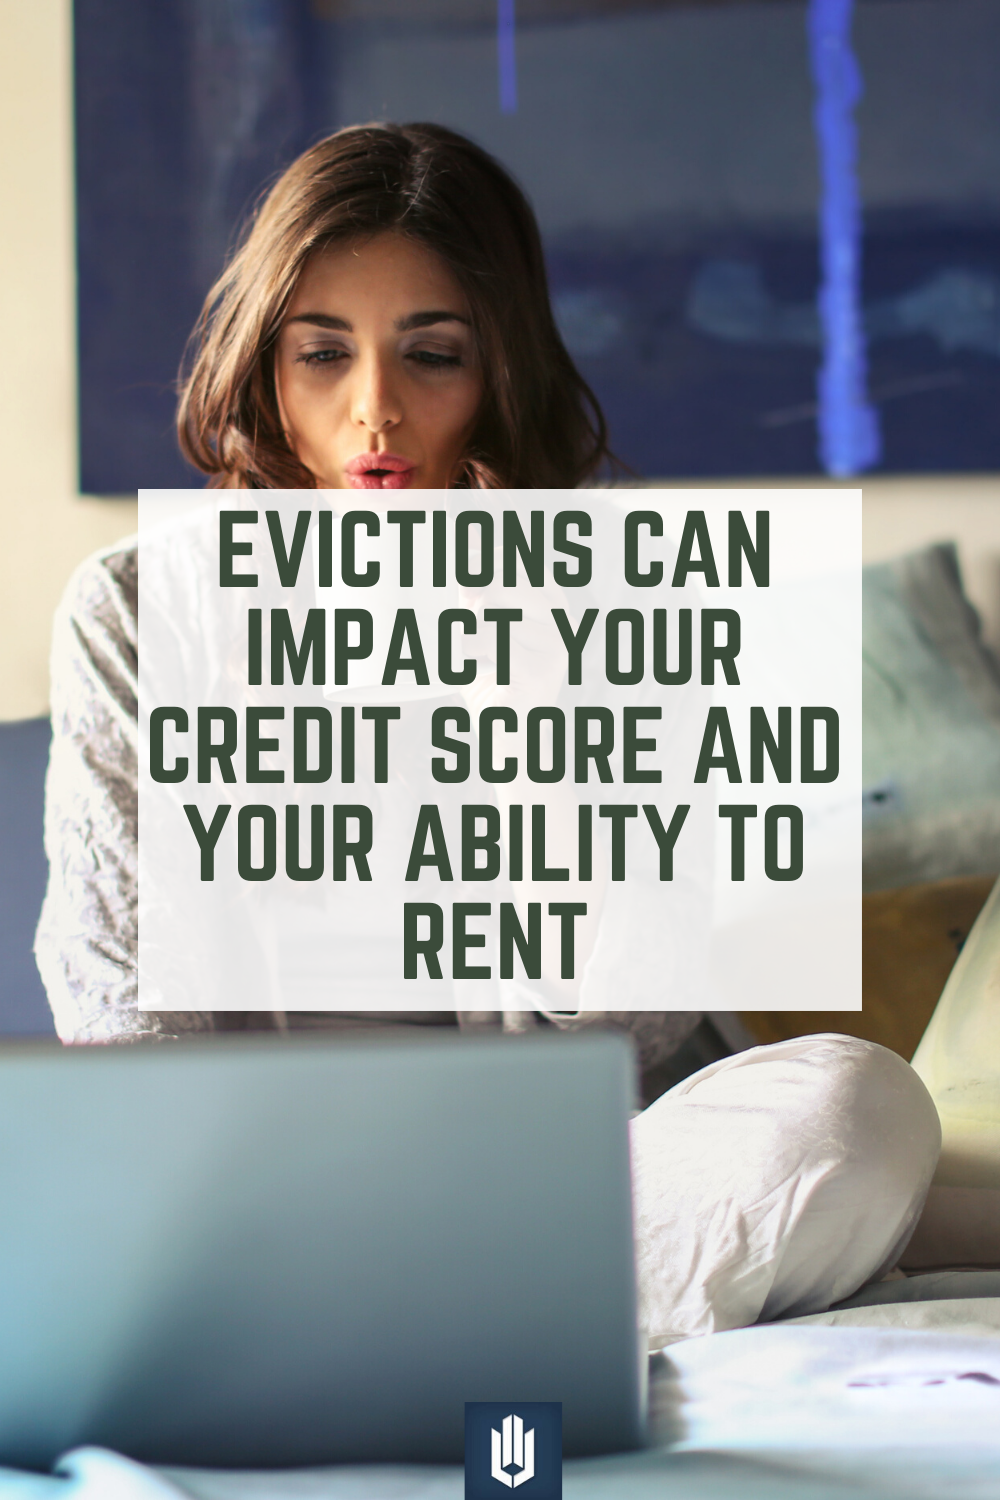 How Long Does an Eviction Stay on Your Record?